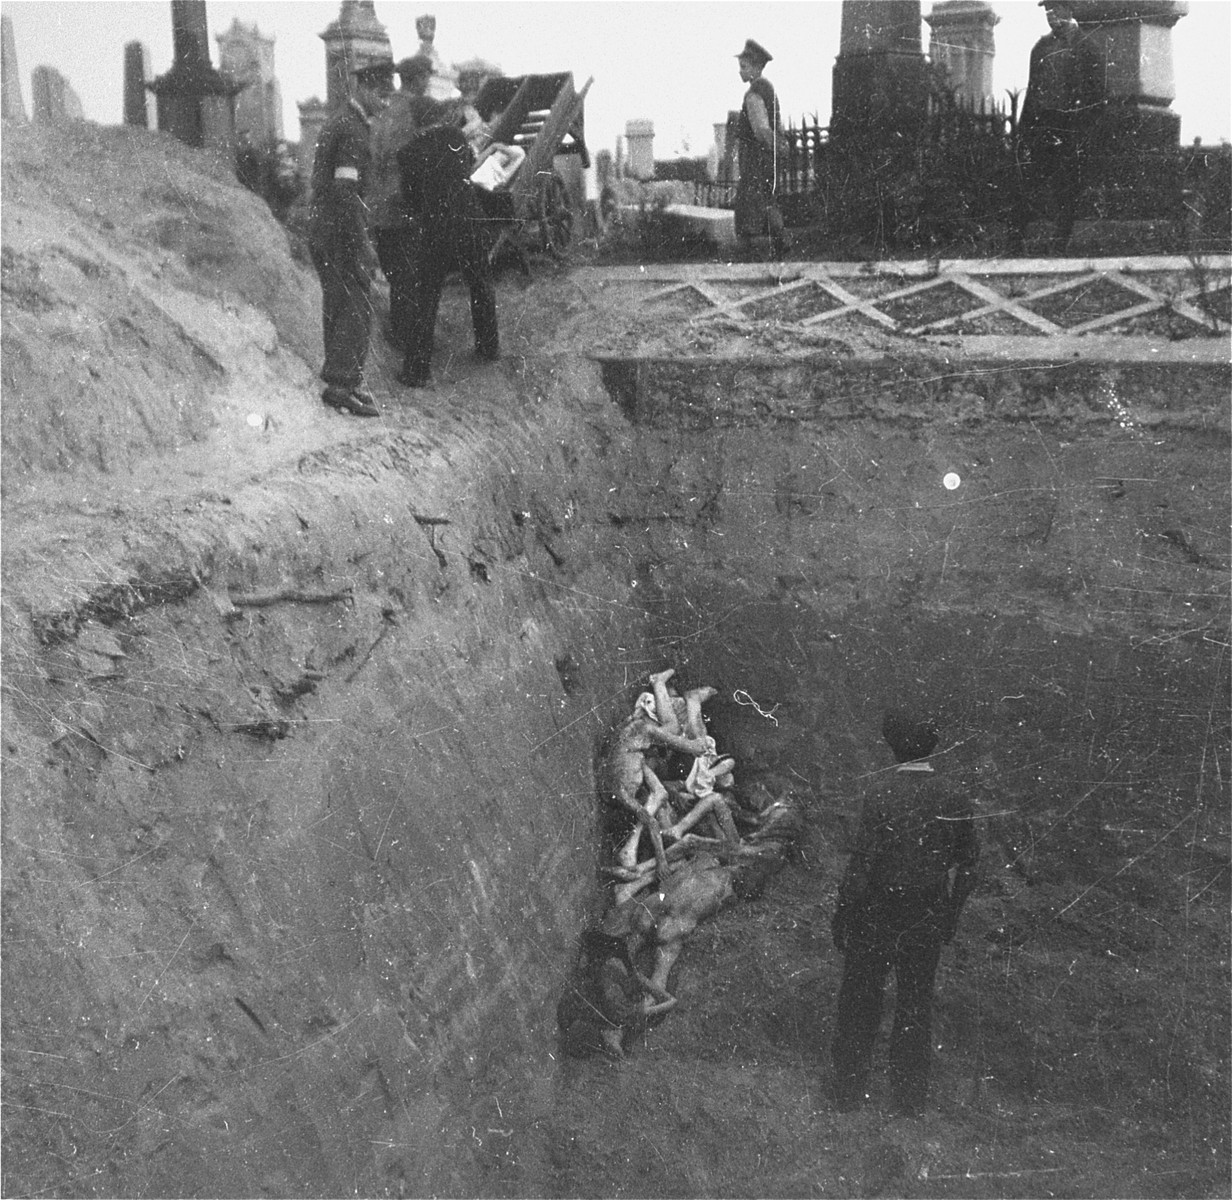 Undertakers from the funeral home of M.B. Pinkiert unload bodies from a cart into a mass grave in the Warsaw ghetto cemetery.  

Joest's caption reads: "Like household trash thrown into a ditch, these corpses of people alive only a short time before, were here dumped into the grave before my eyes."